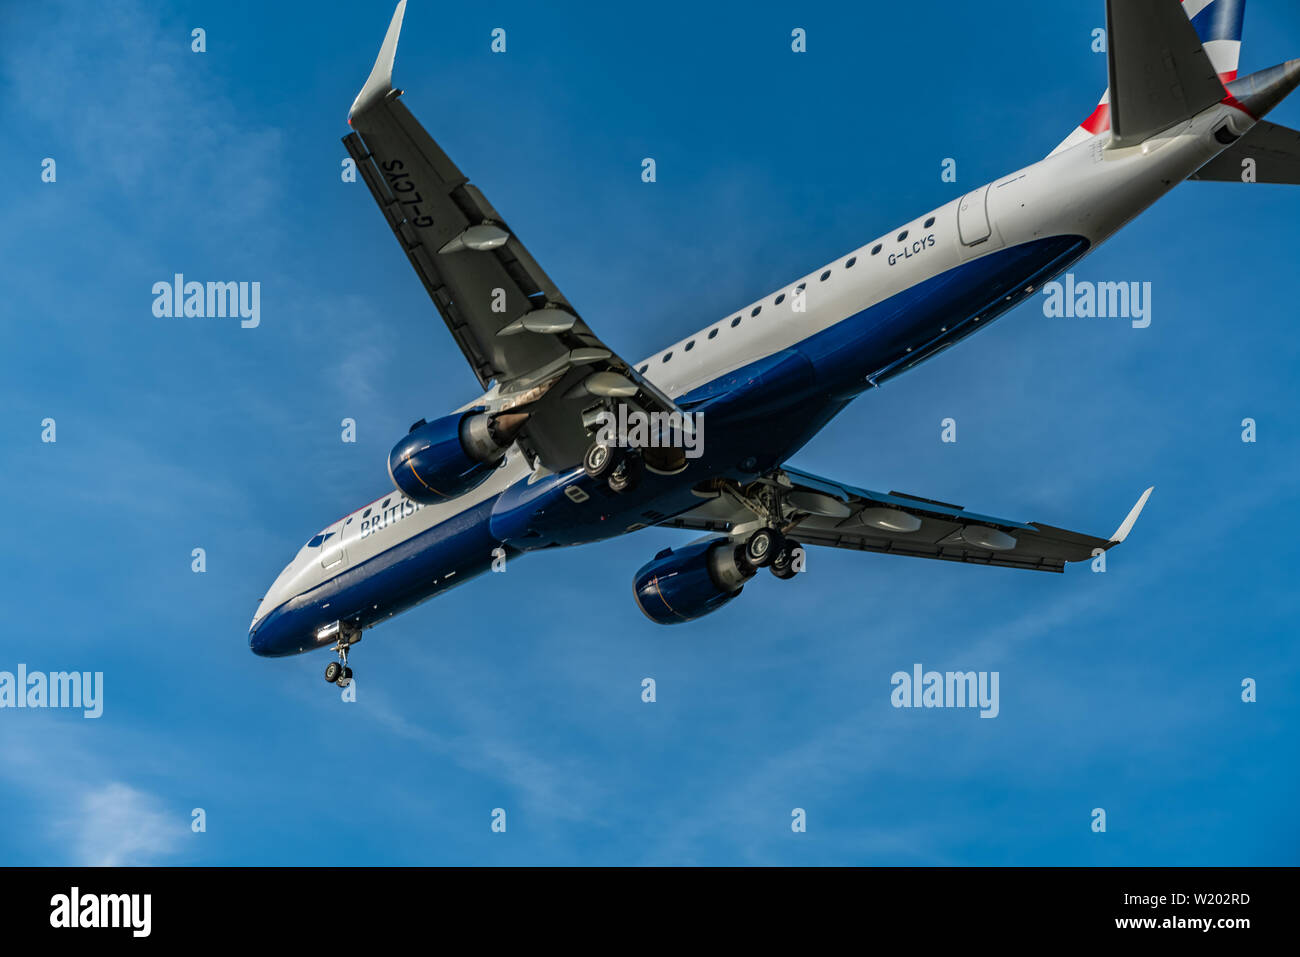 London, UK - 17, February 2019: BA CityFlyer a wholly owned subsidiary airline of British Airways based in Manchester England, aircraft type Embraer E Stock Photo